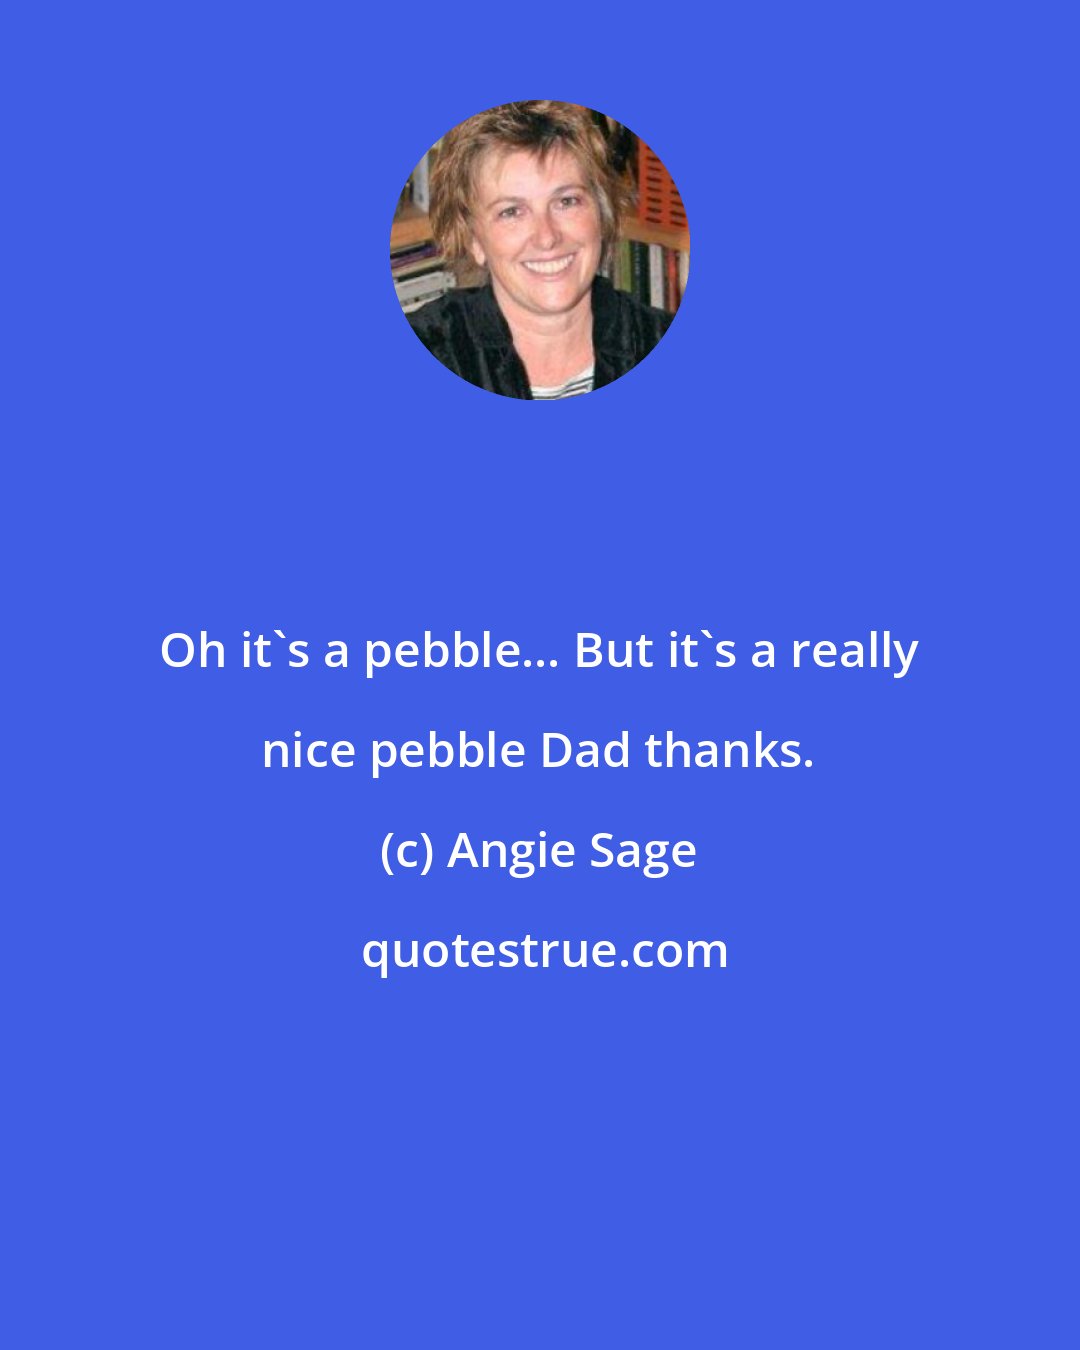 Angie Sage: Oh it's a pebble... But it's a really nice pebble Dad thanks.